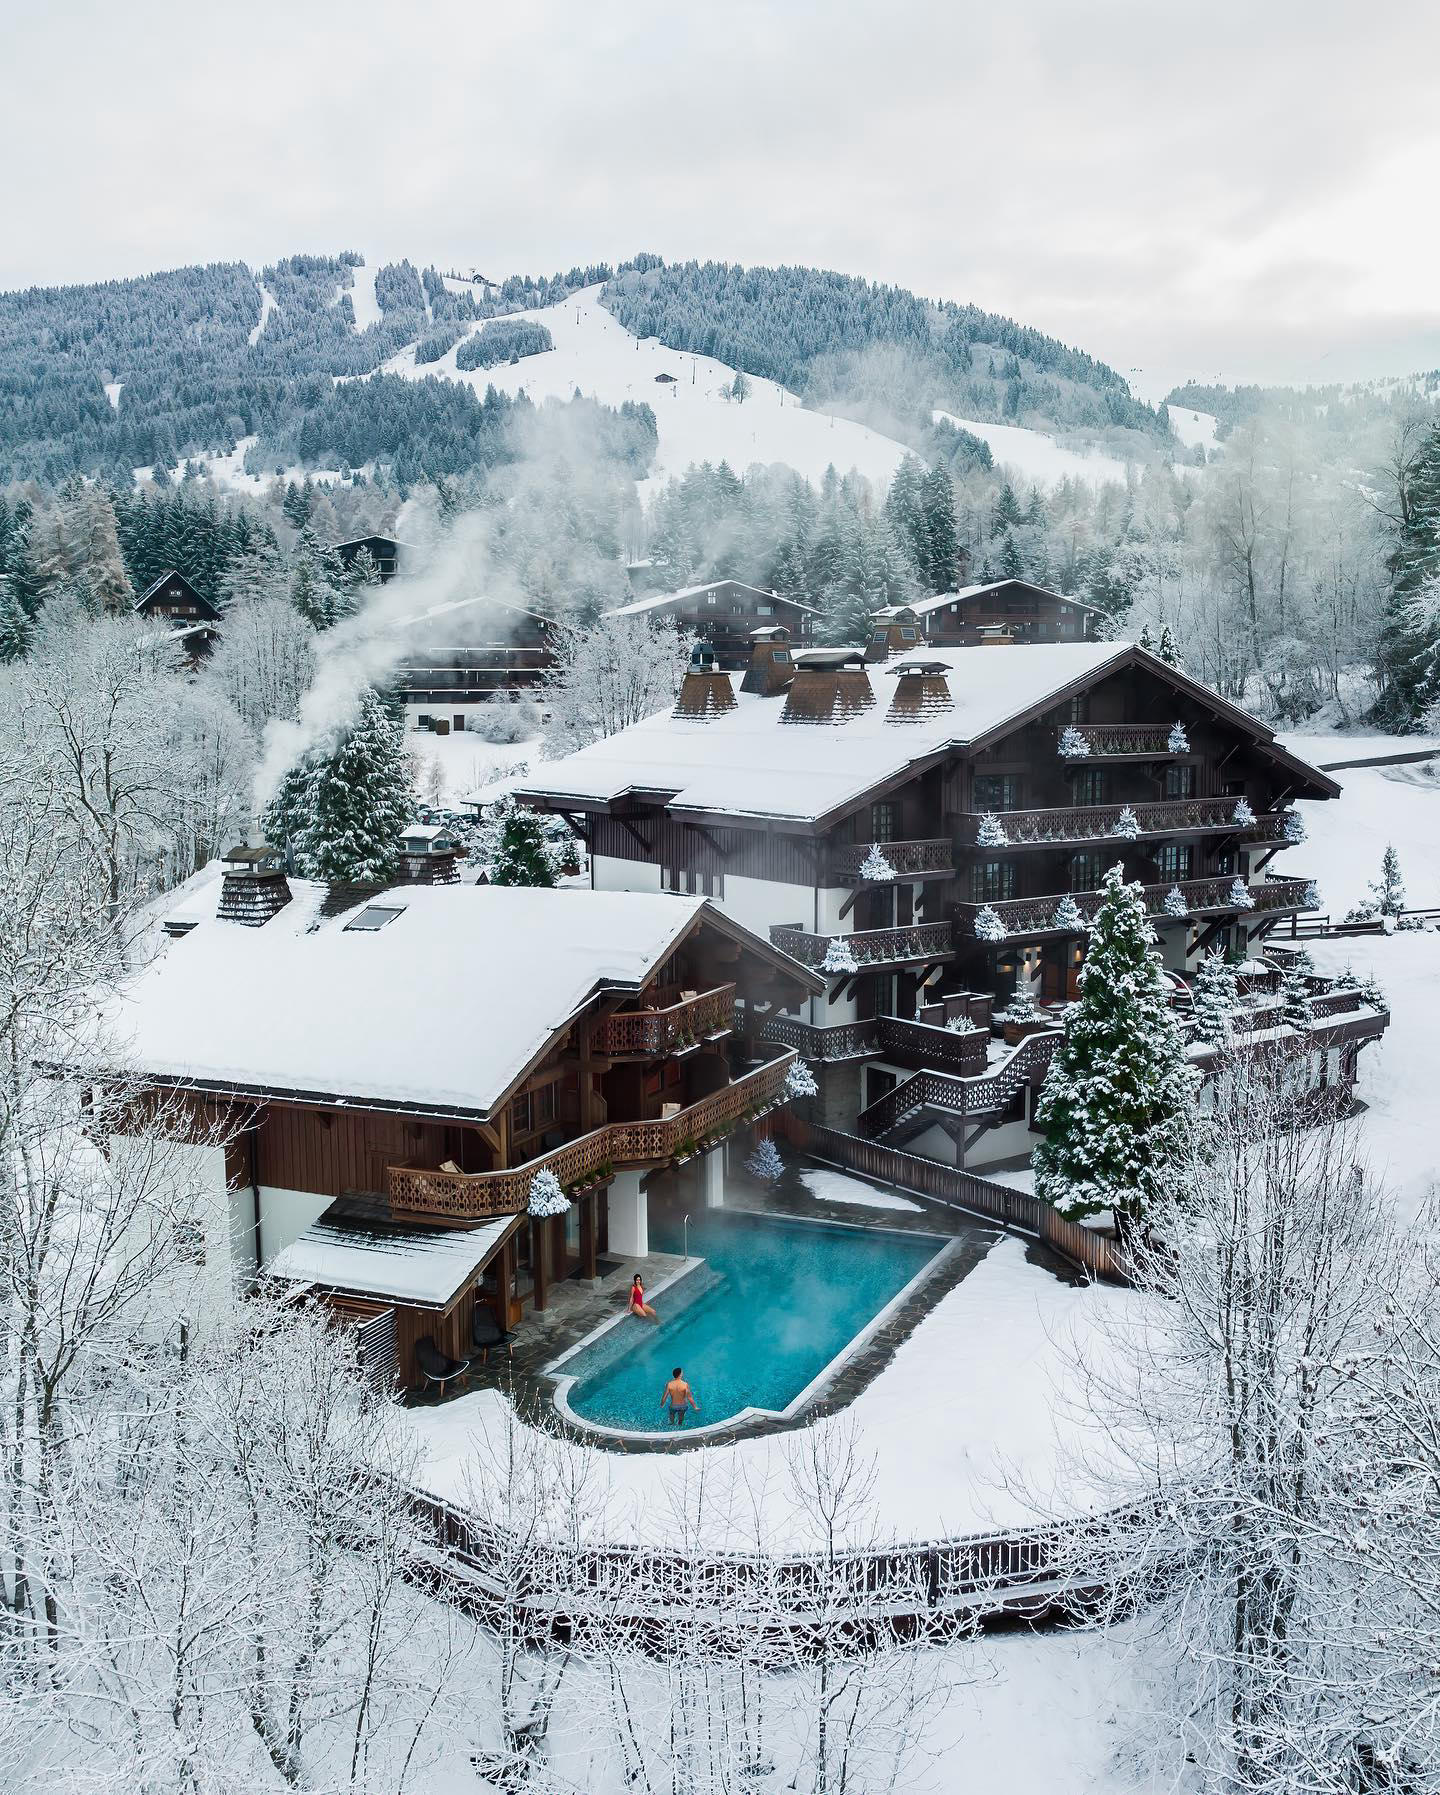 image  1 JEREMY AUSTIN - Living a winter dream in our authentic Alpine chalet at #fsmegeve